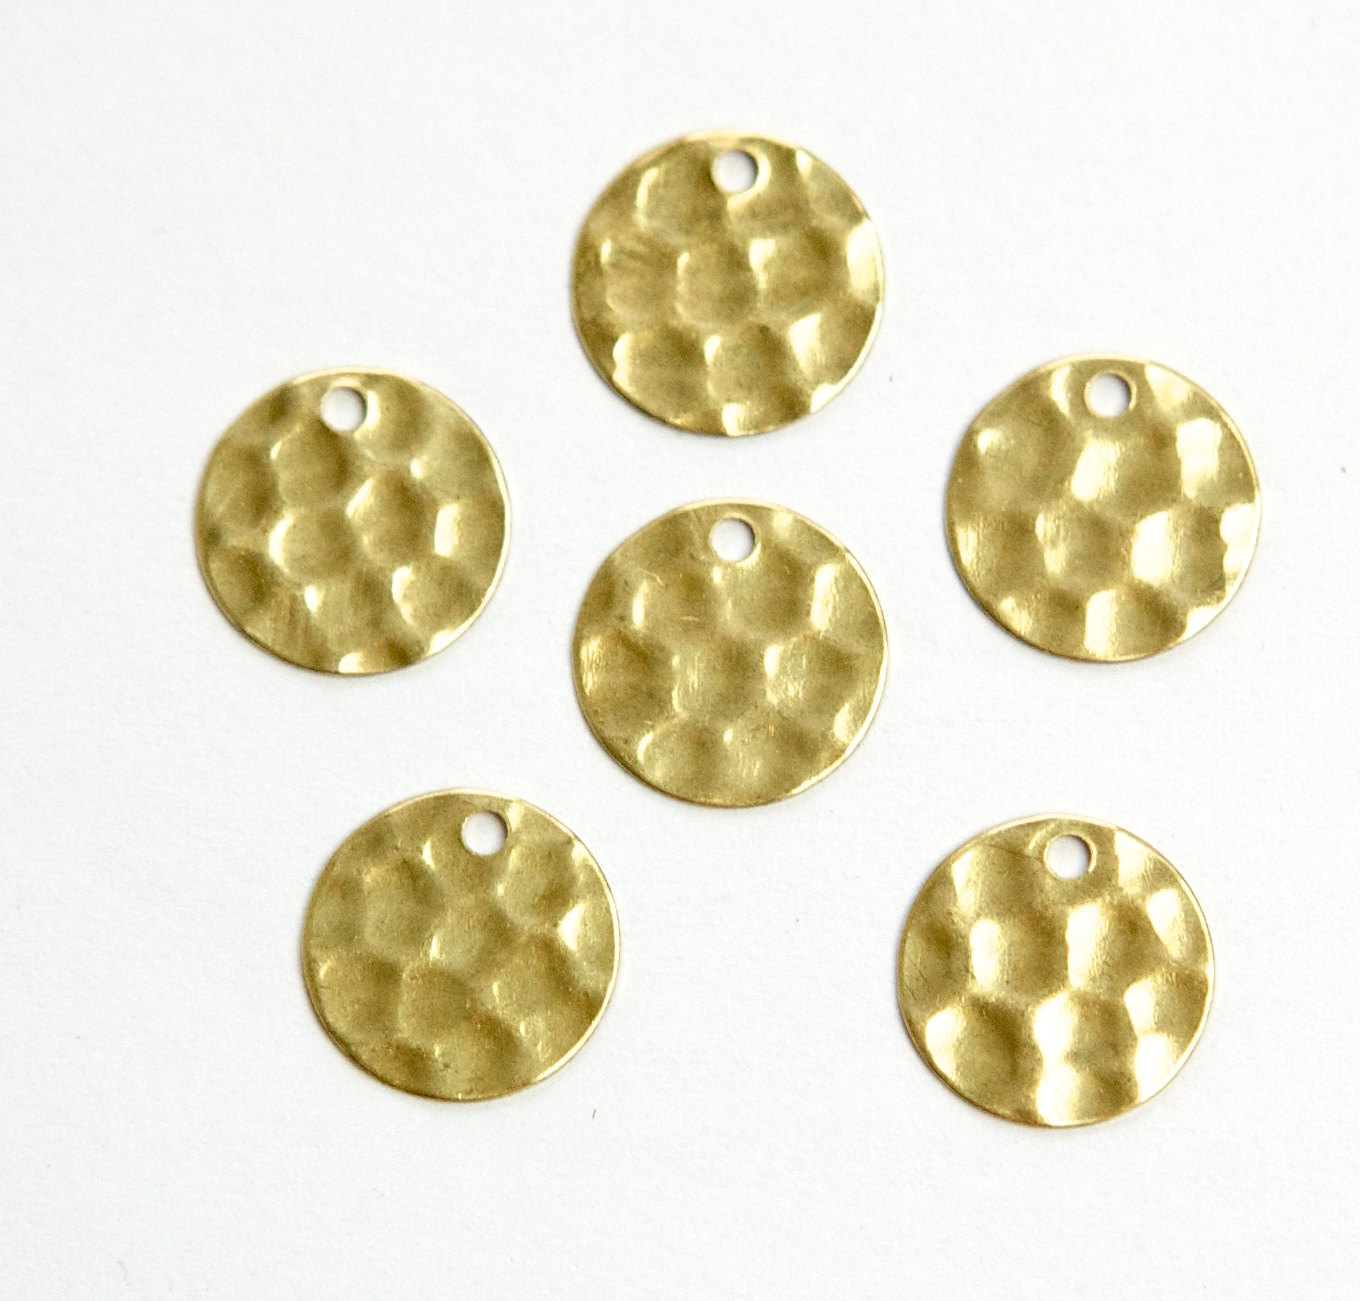 1 Hole Raw Brass Hammered Circle Charms Drops 12mm (10) mtl393A steampunk buy now online